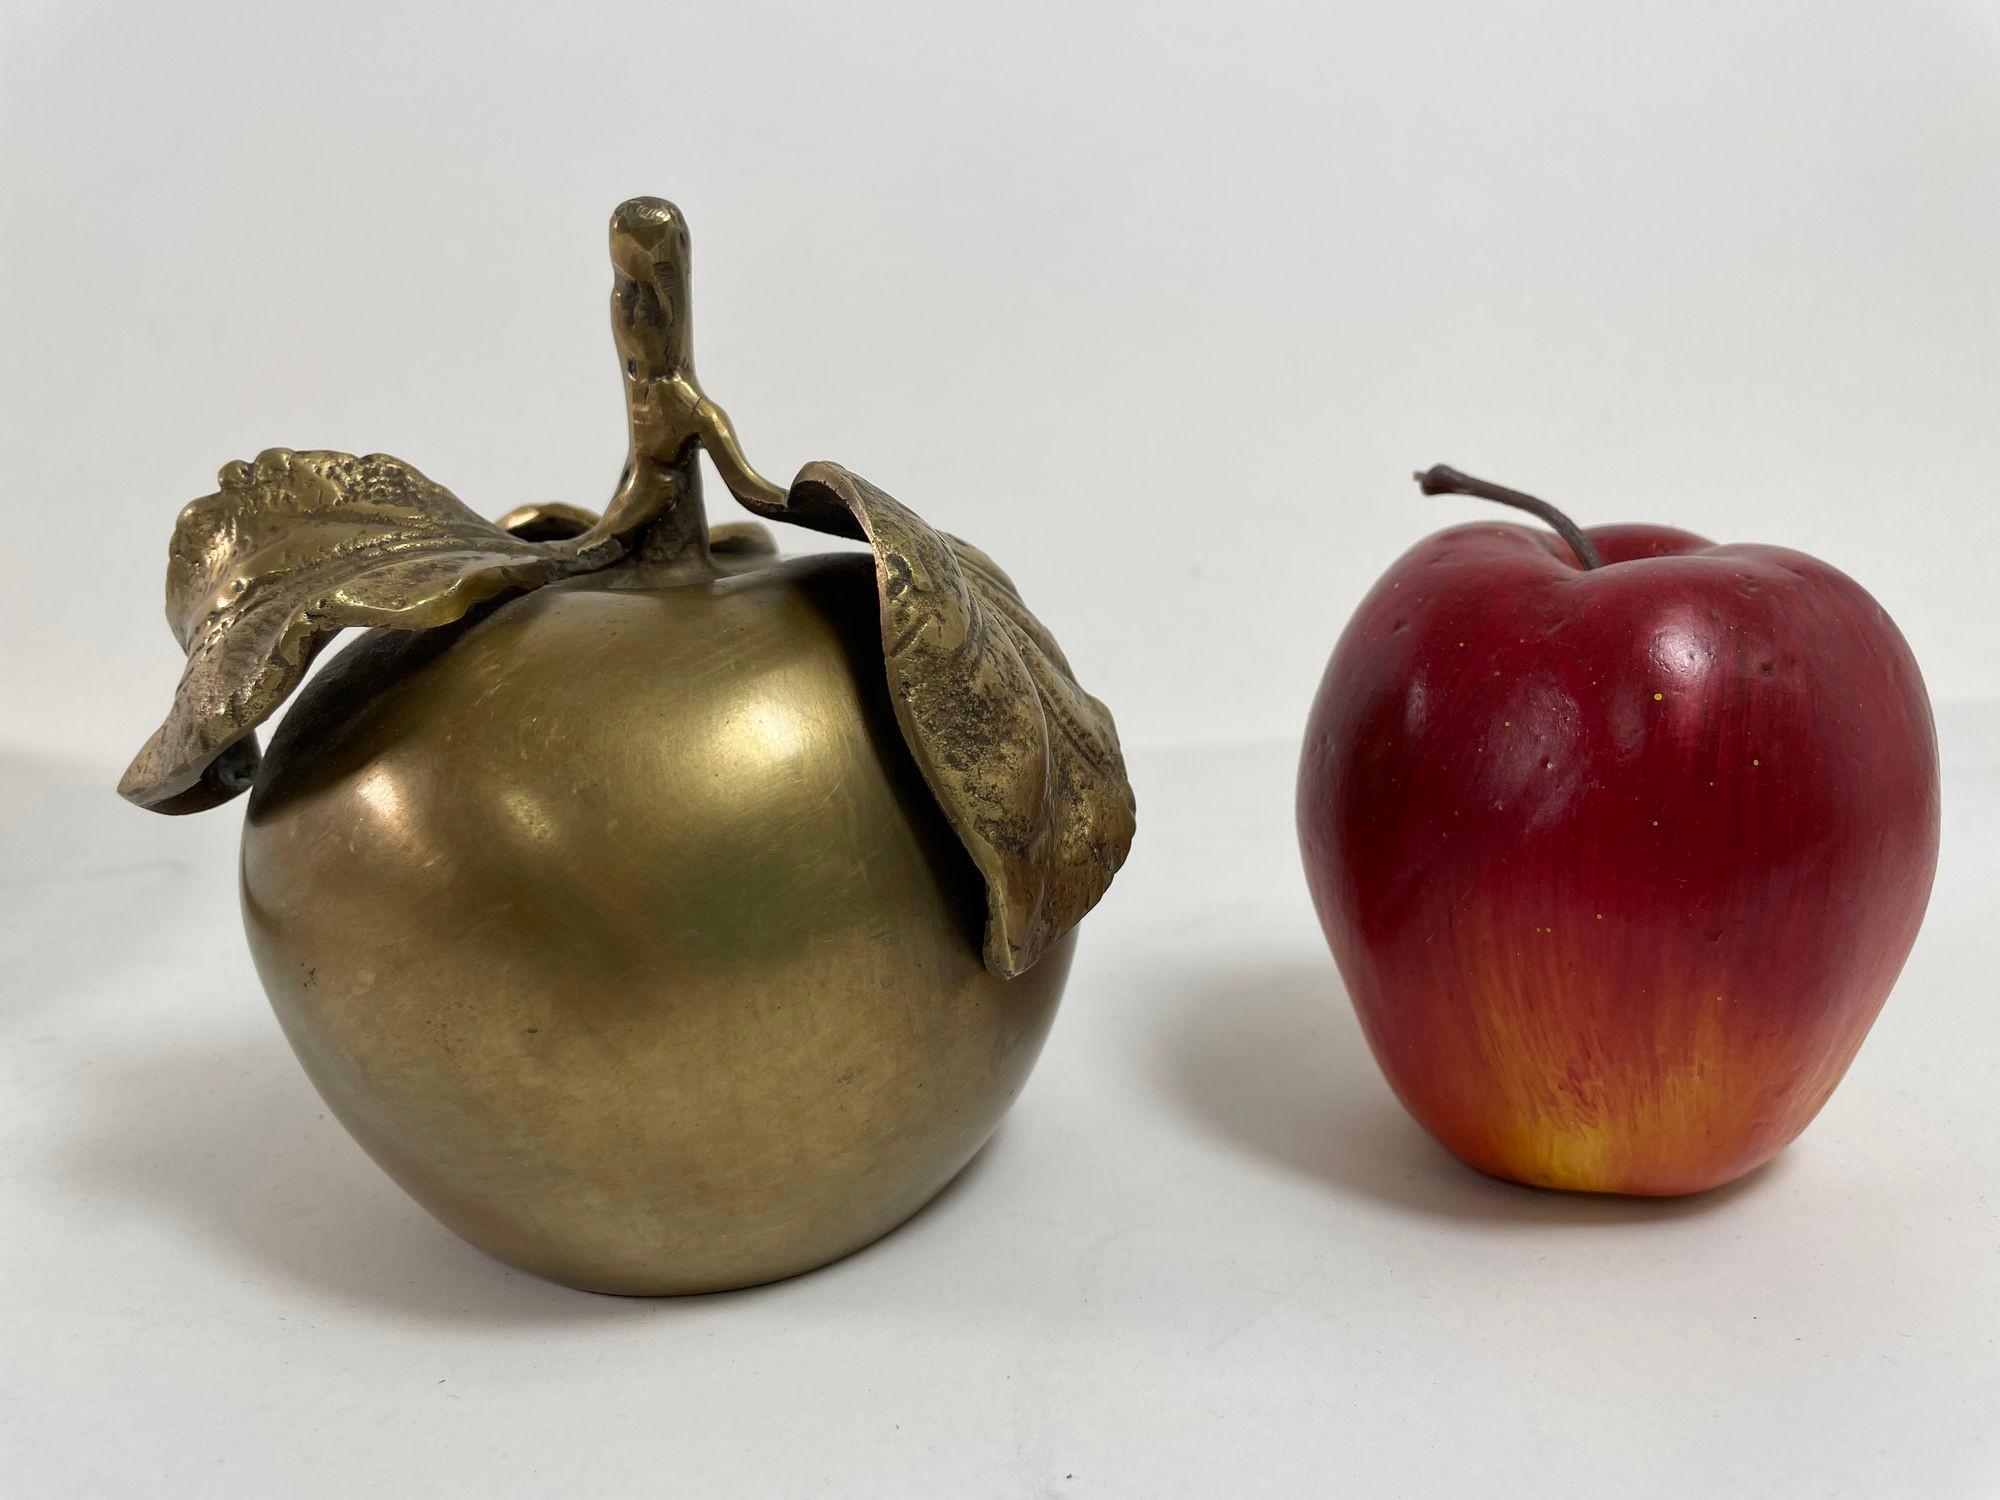 Vintage Brass Apple Sculpture Paperweight For Sale 1